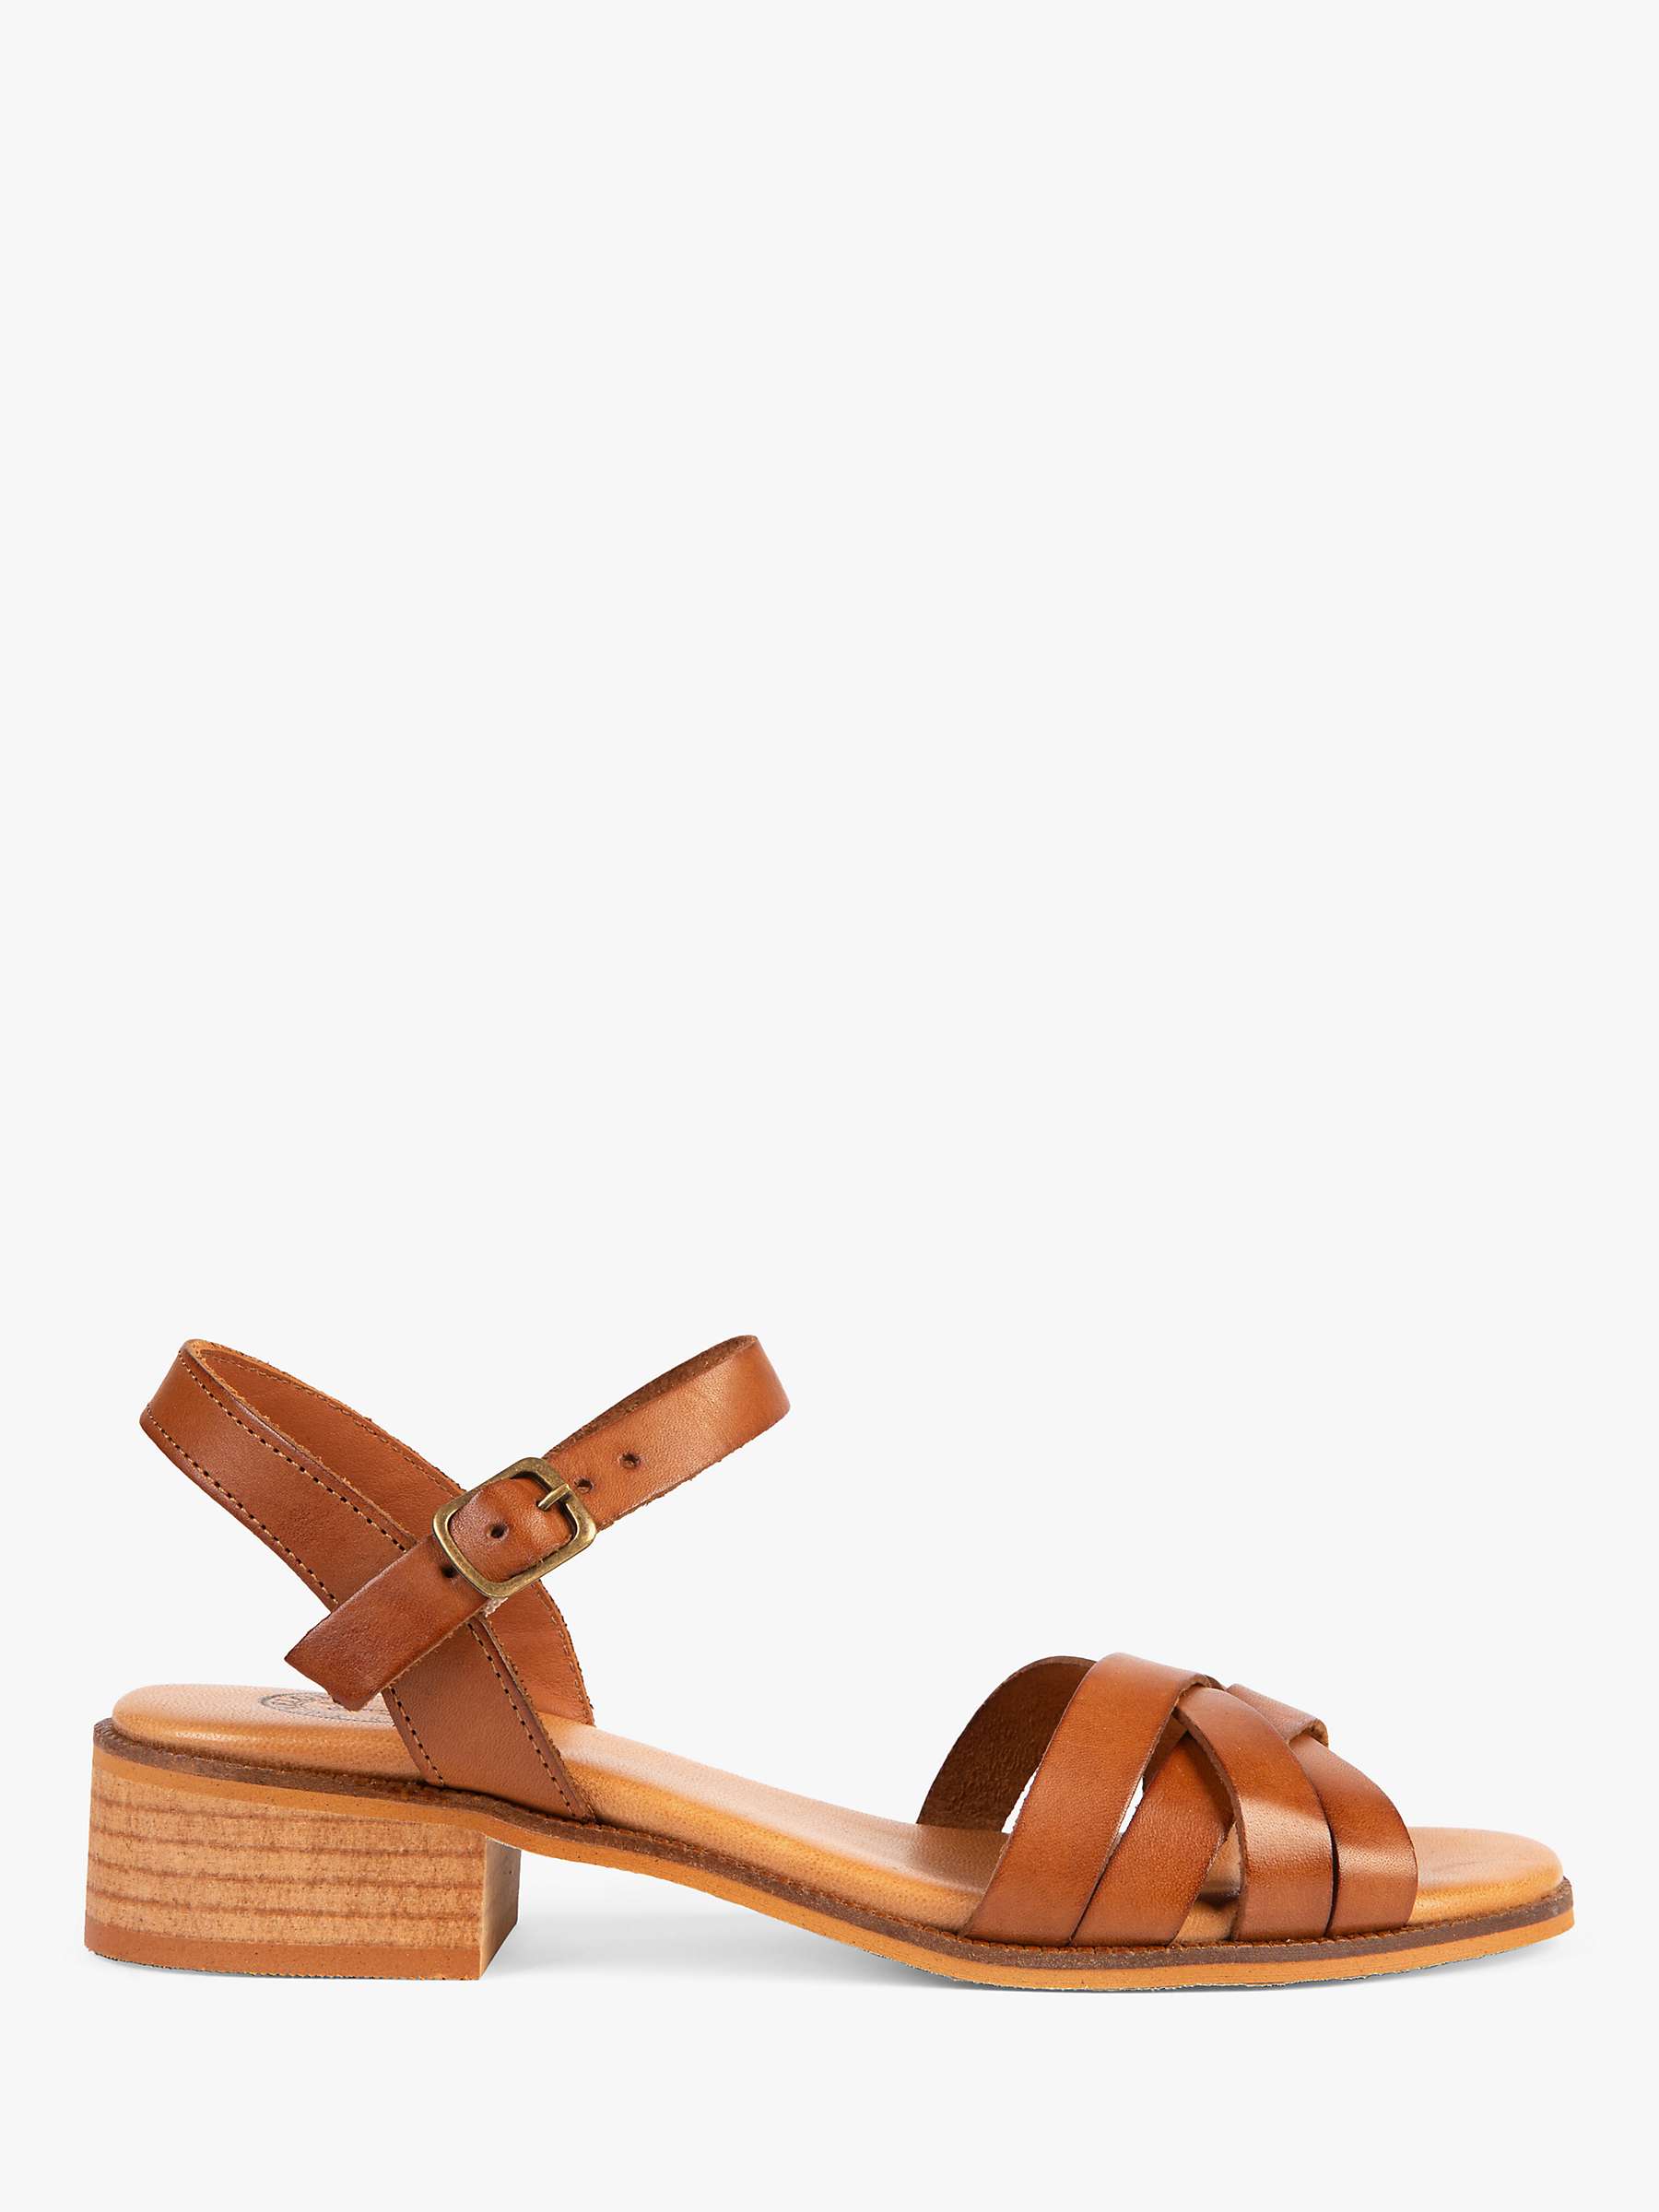 Buy Penelope Chilvers Shepherdess Leather Sandals Online at johnlewis.com